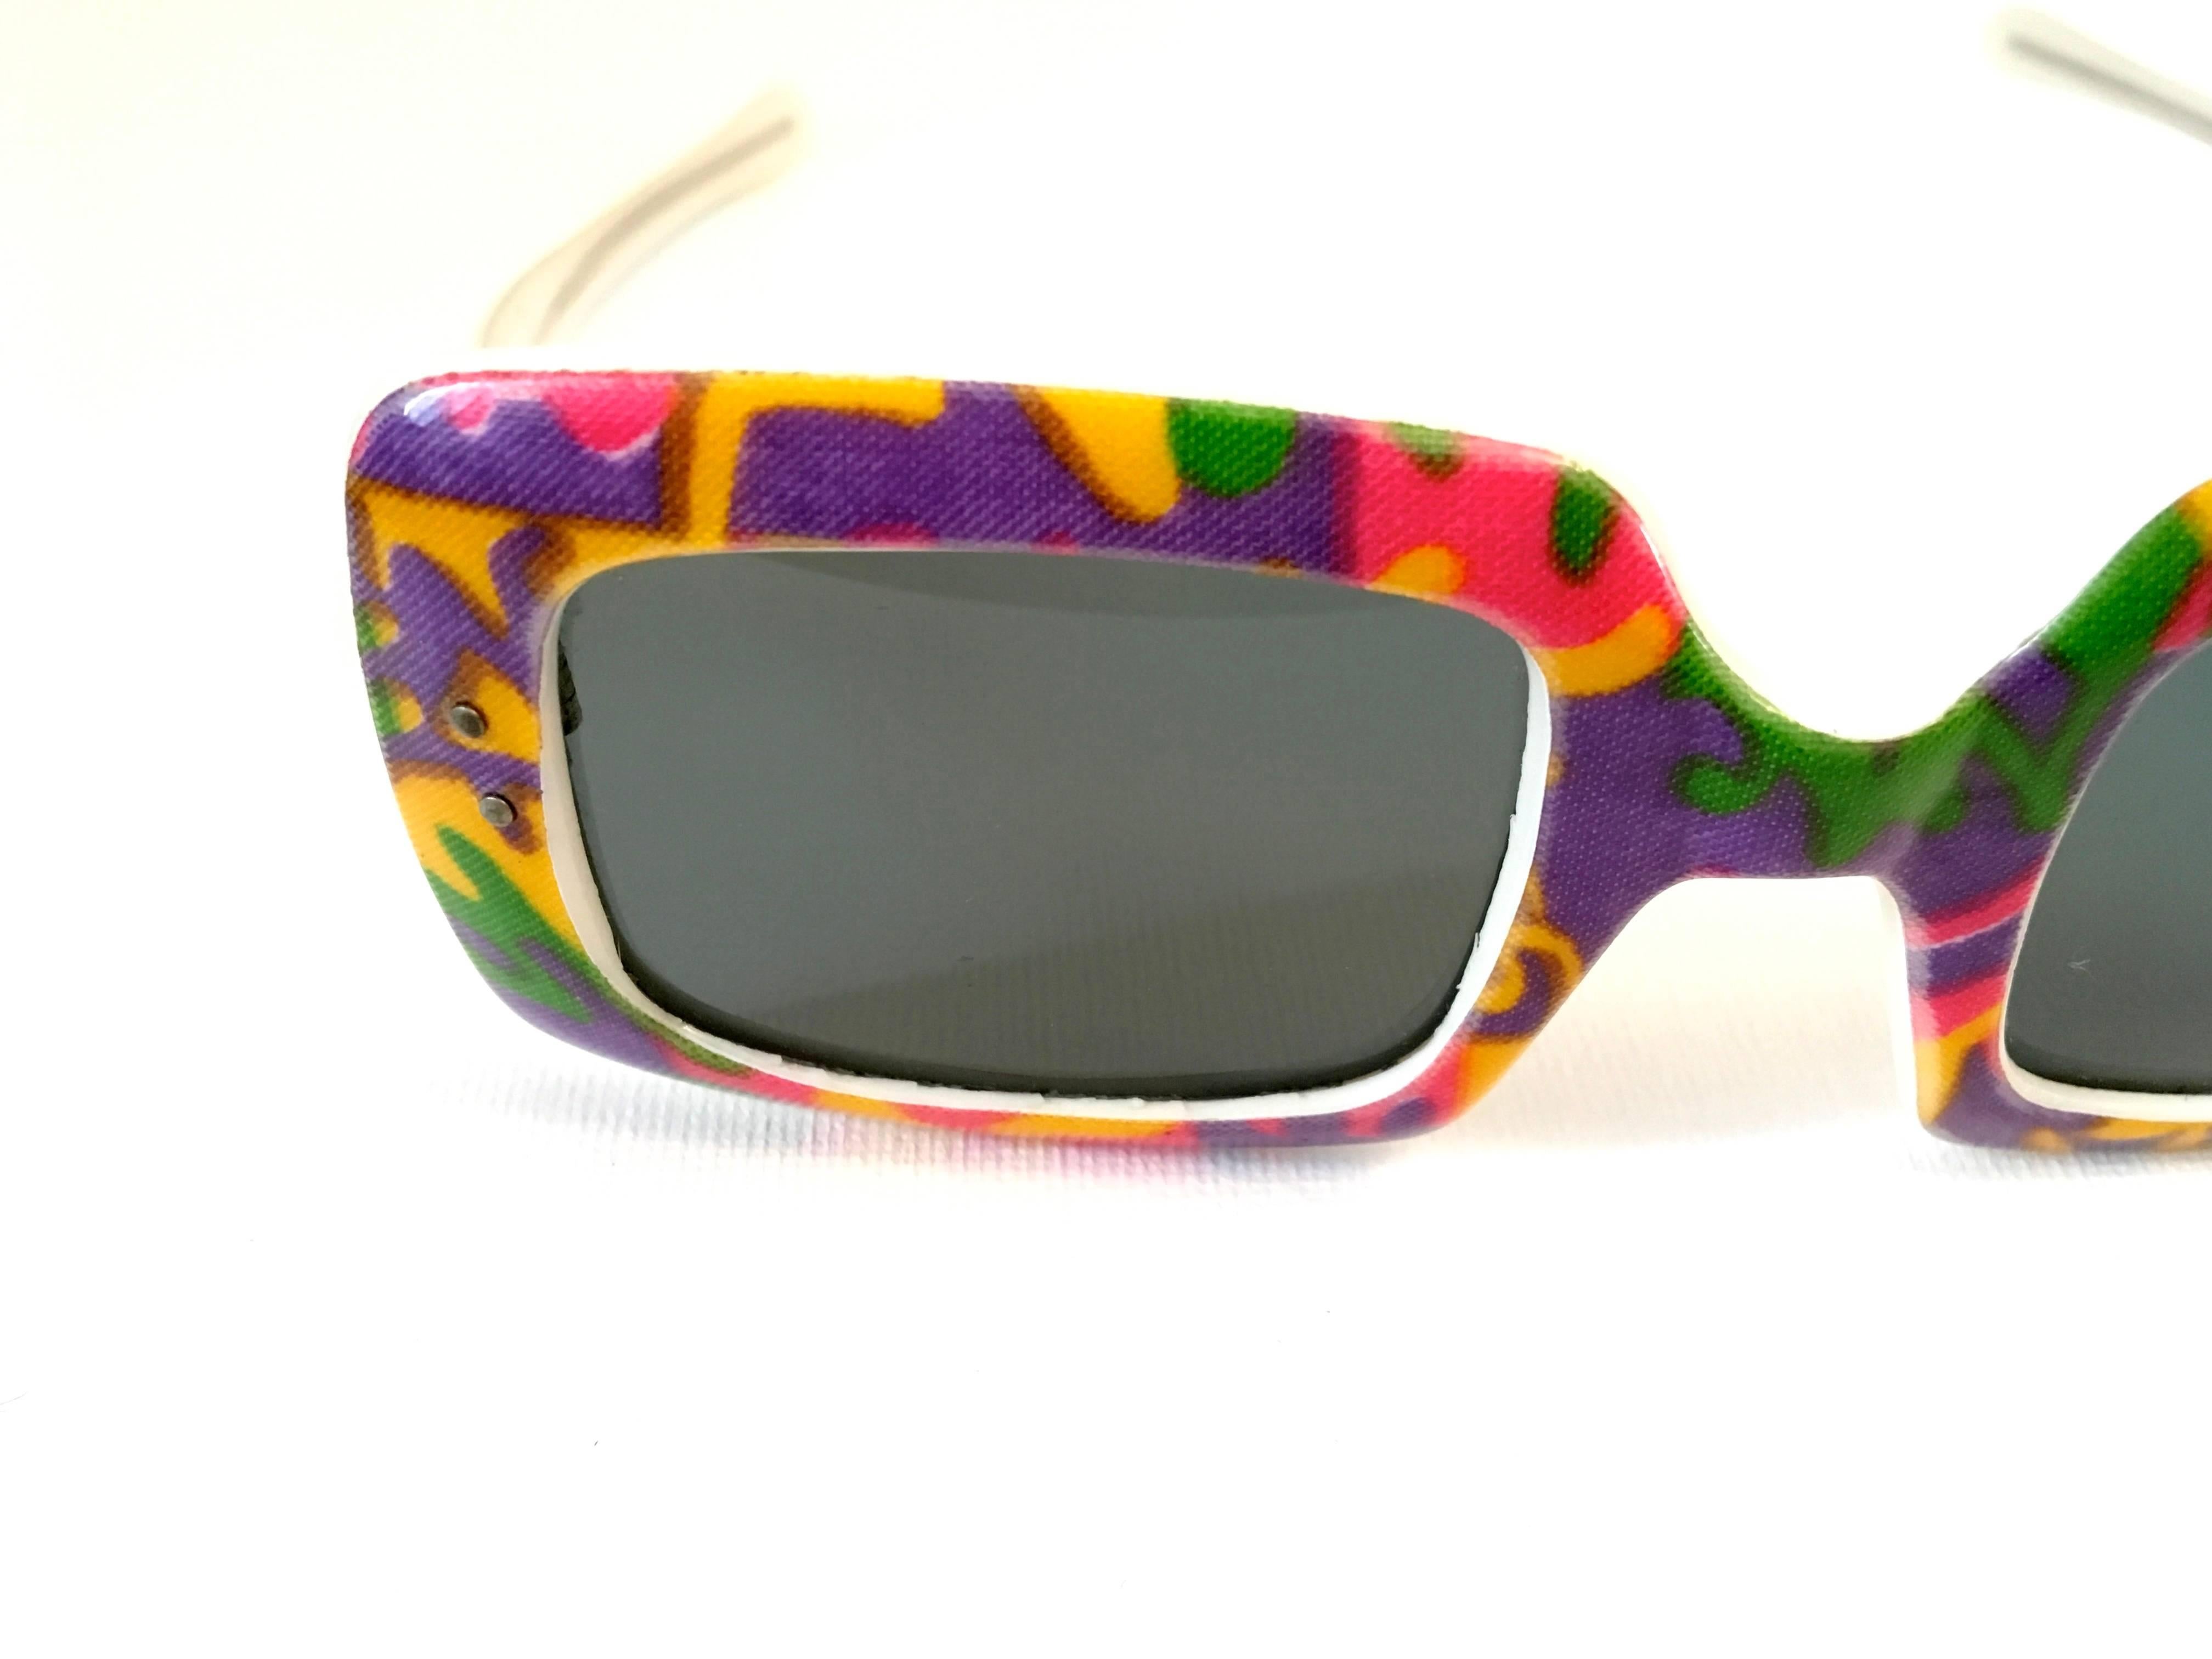 Presented here is a fantastic pair of sunglasses from the 1960's. This mod pair of sunglasses is comprised of a psychadelic colored design on the front of the glasses with a square-like shape of lenses on the front. The back is a combination of